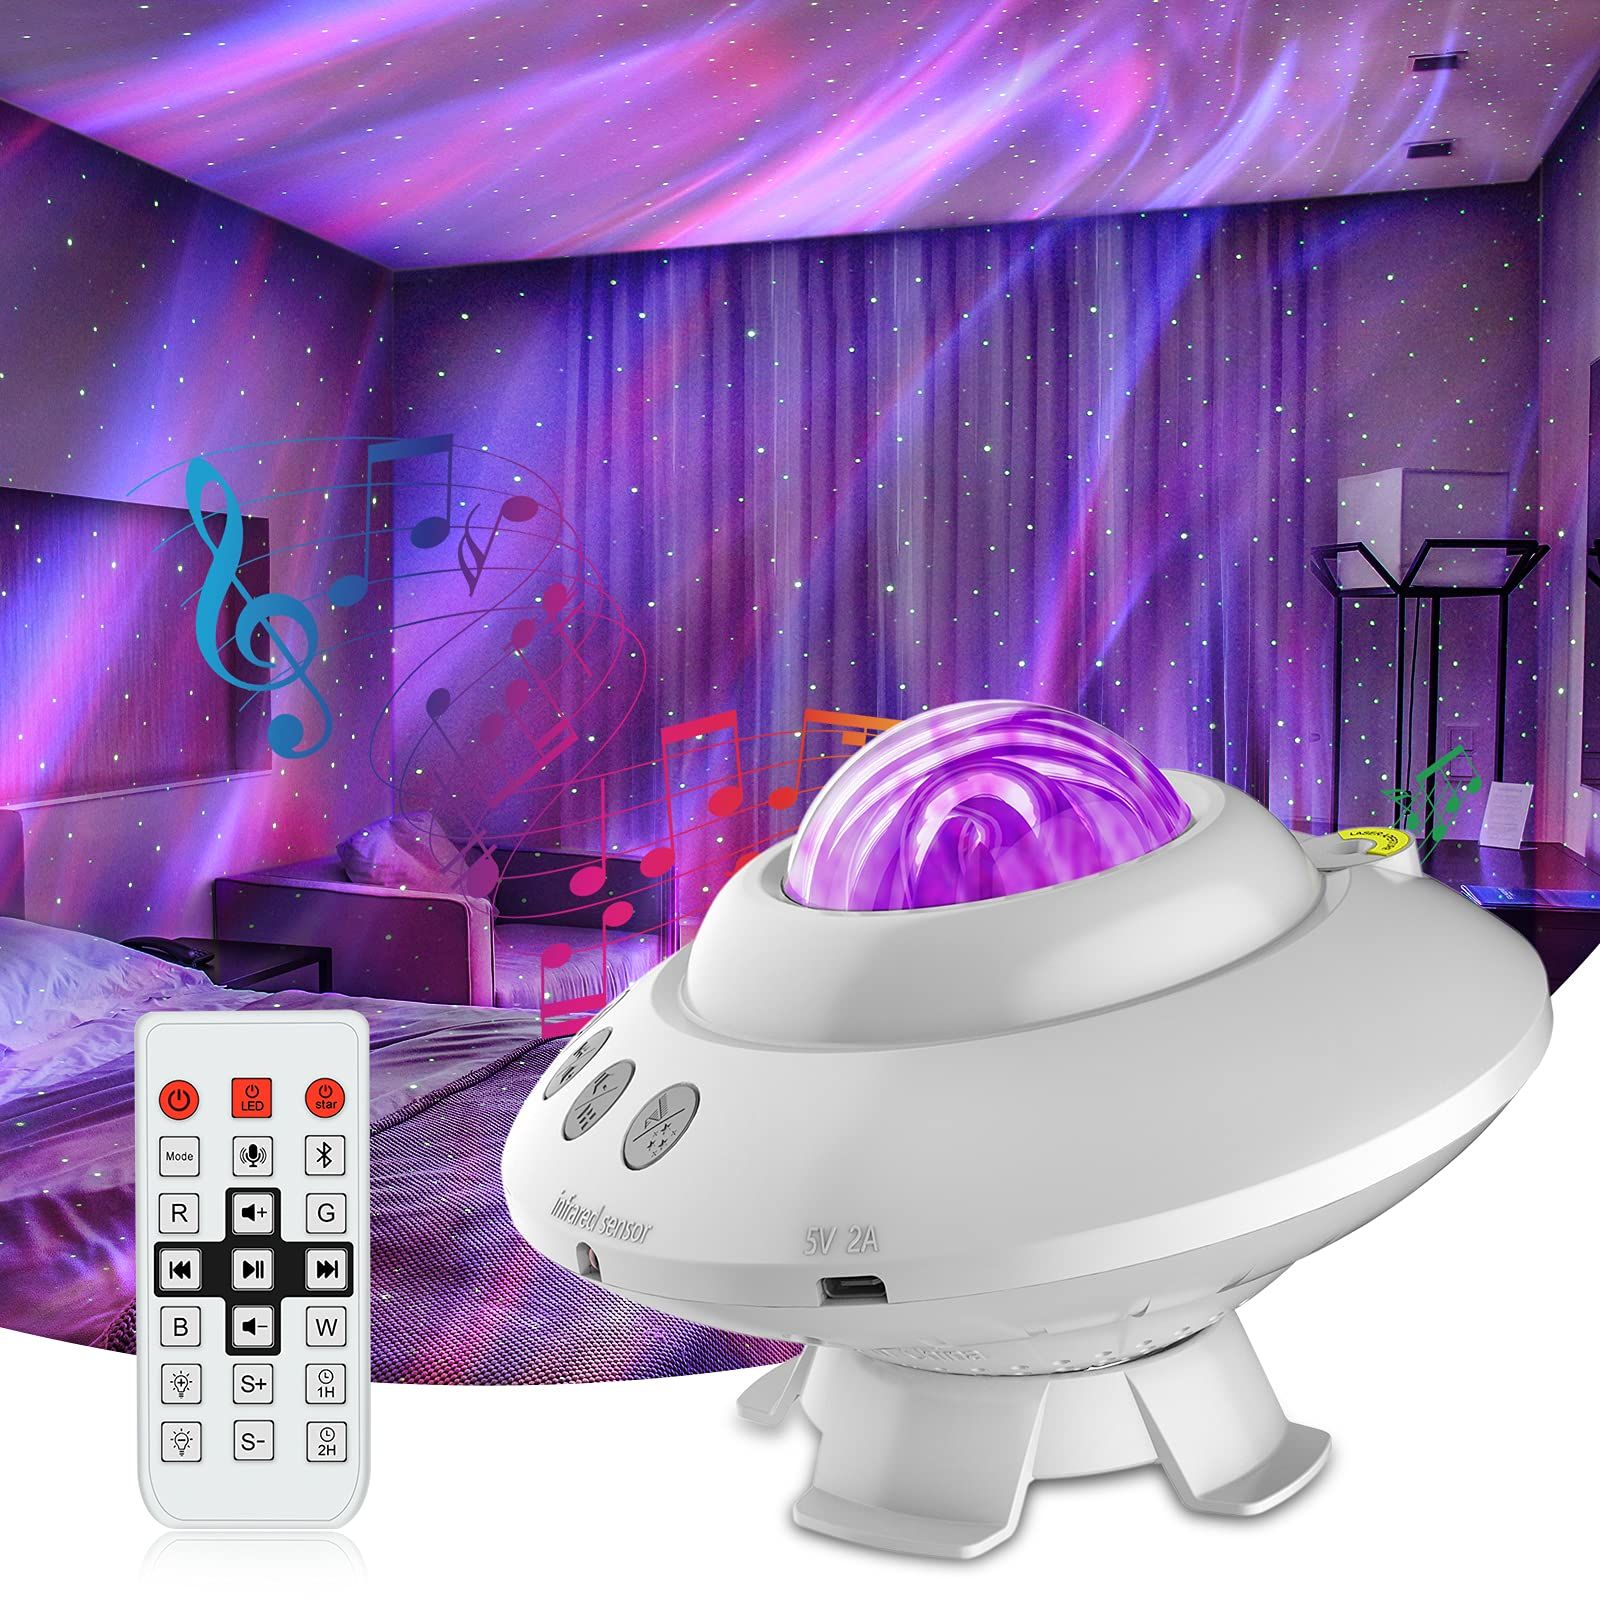 IXI Aurora Star Projector, Night Light Projector with 14 Lighting Effects, Remote Control UFO Shaped | Amazon (US)